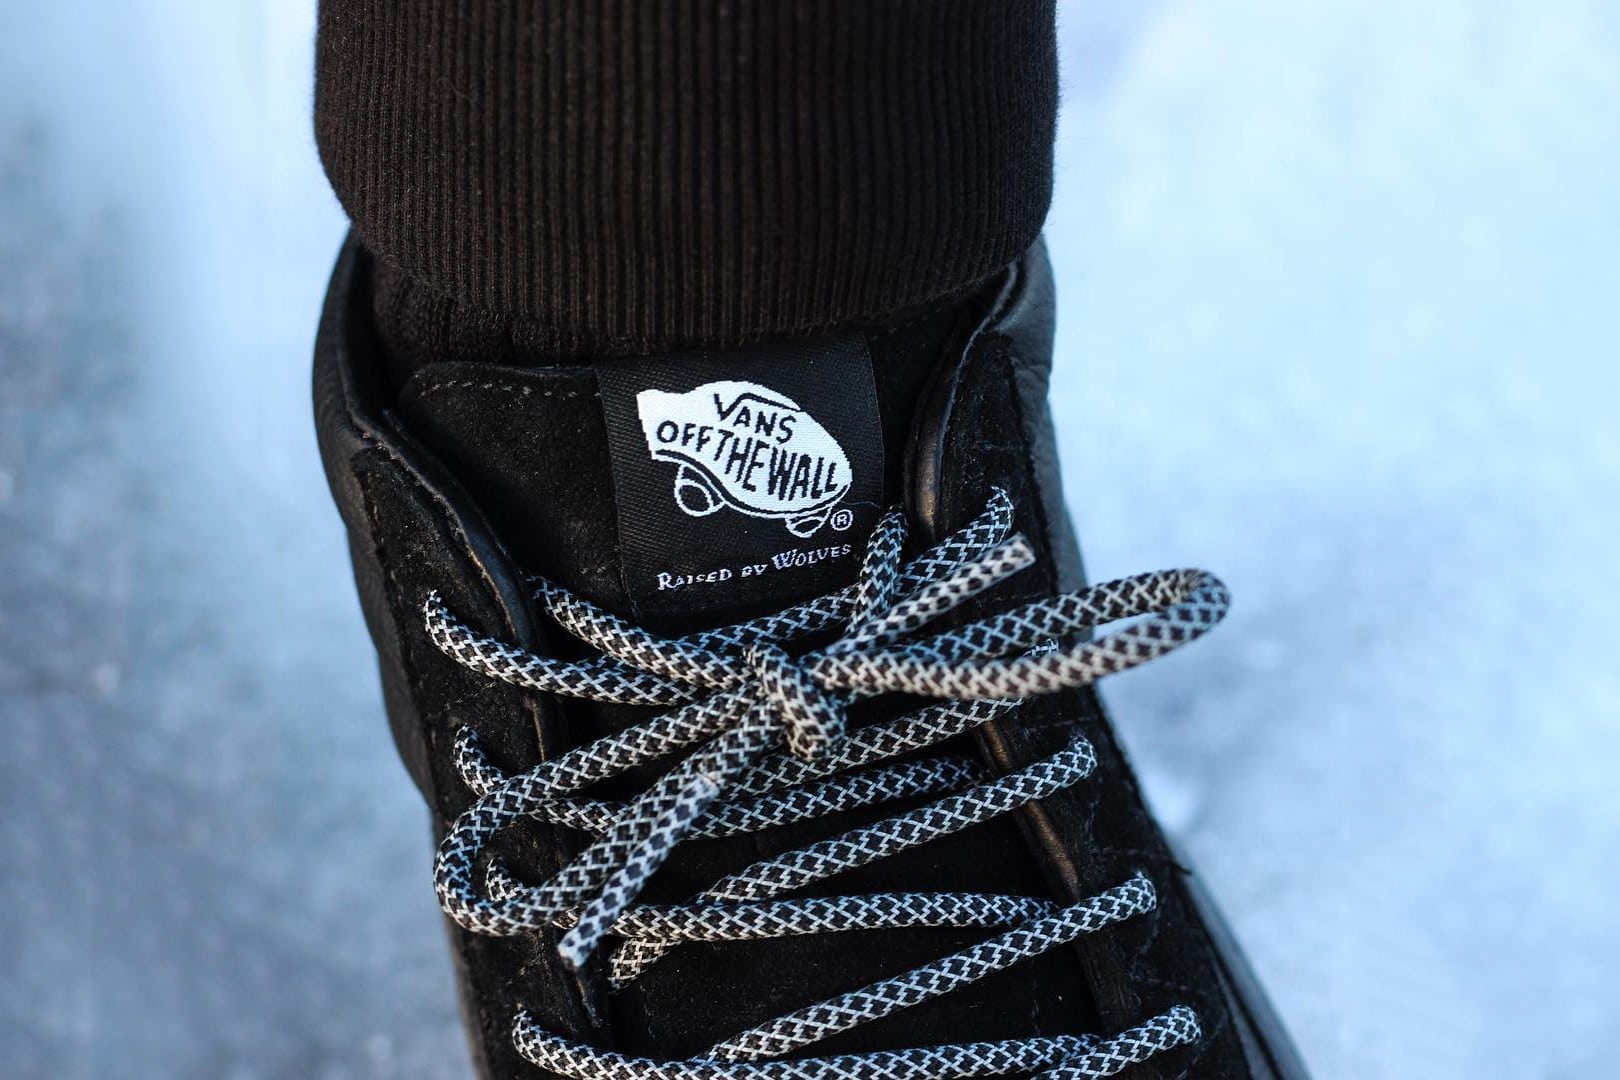 a-first-look-at-the-raised-by-wolves-x-off-the-hook-x-vans-collaboration-1